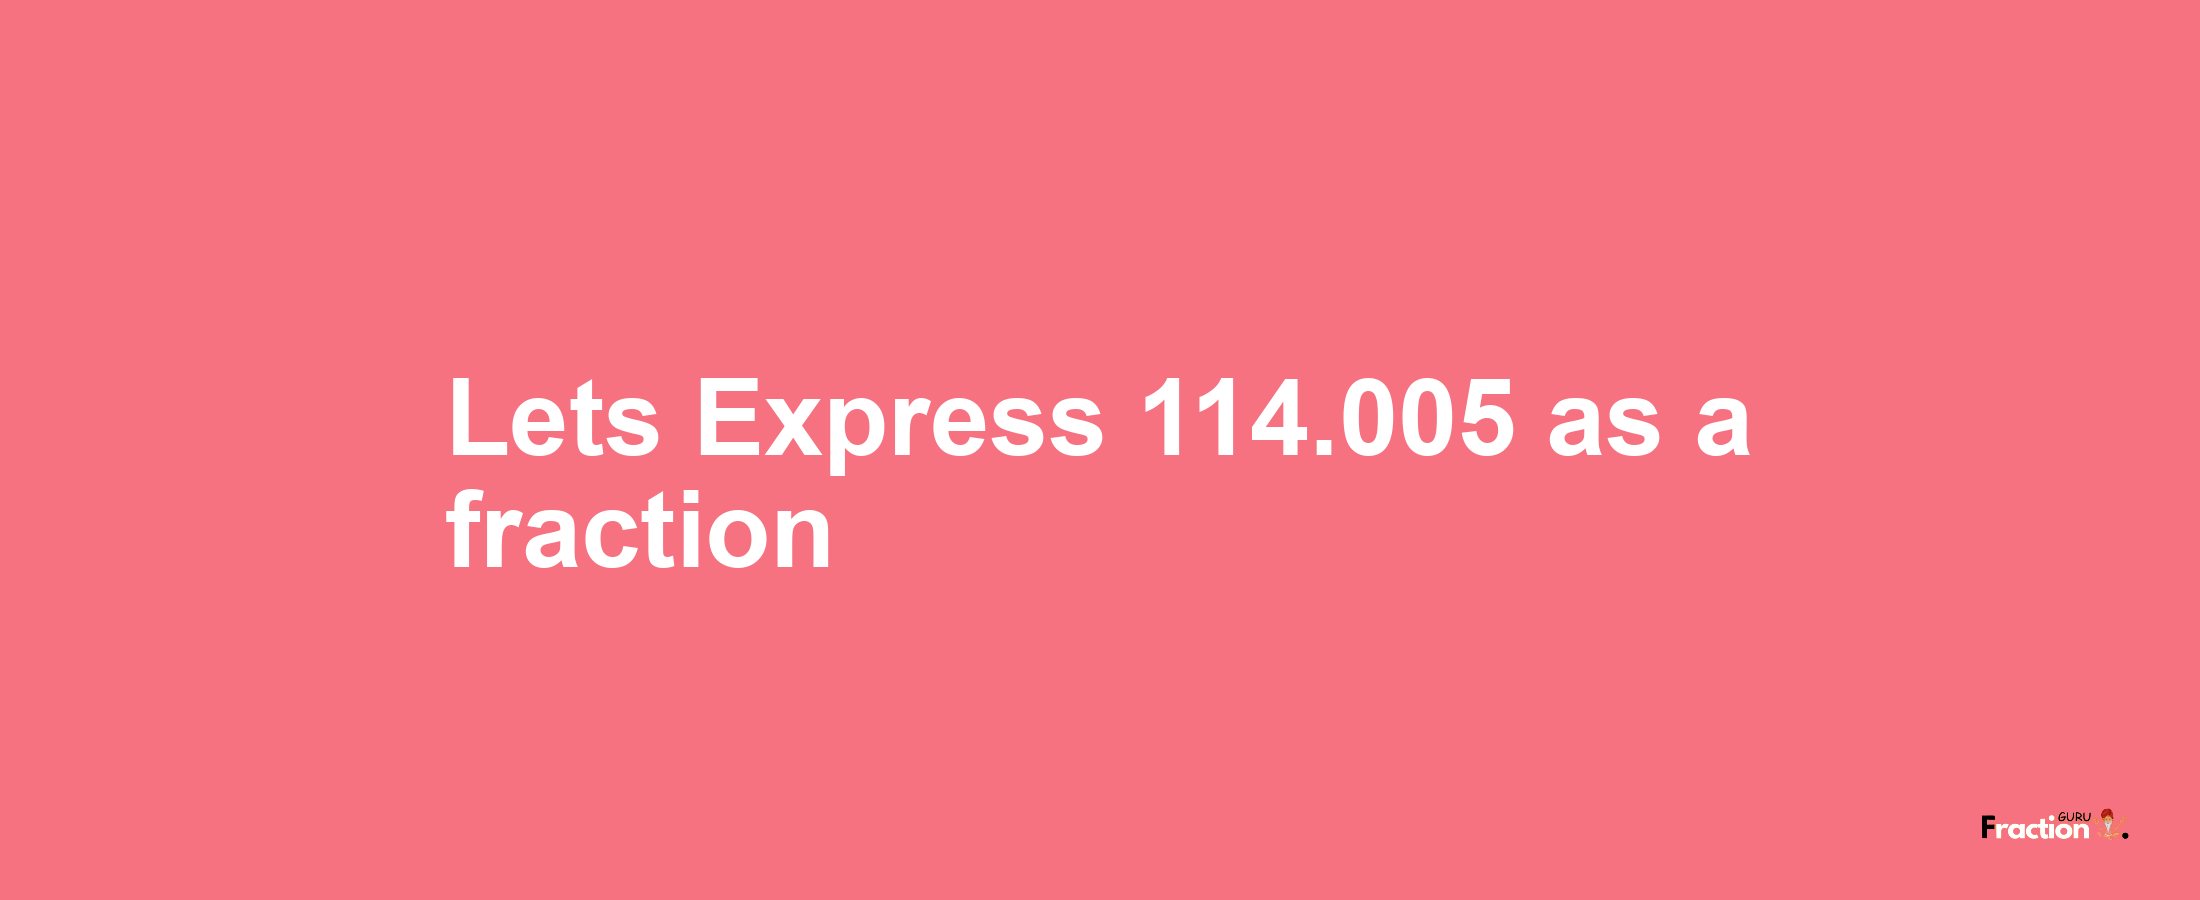 Lets Express 114.005 as afraction